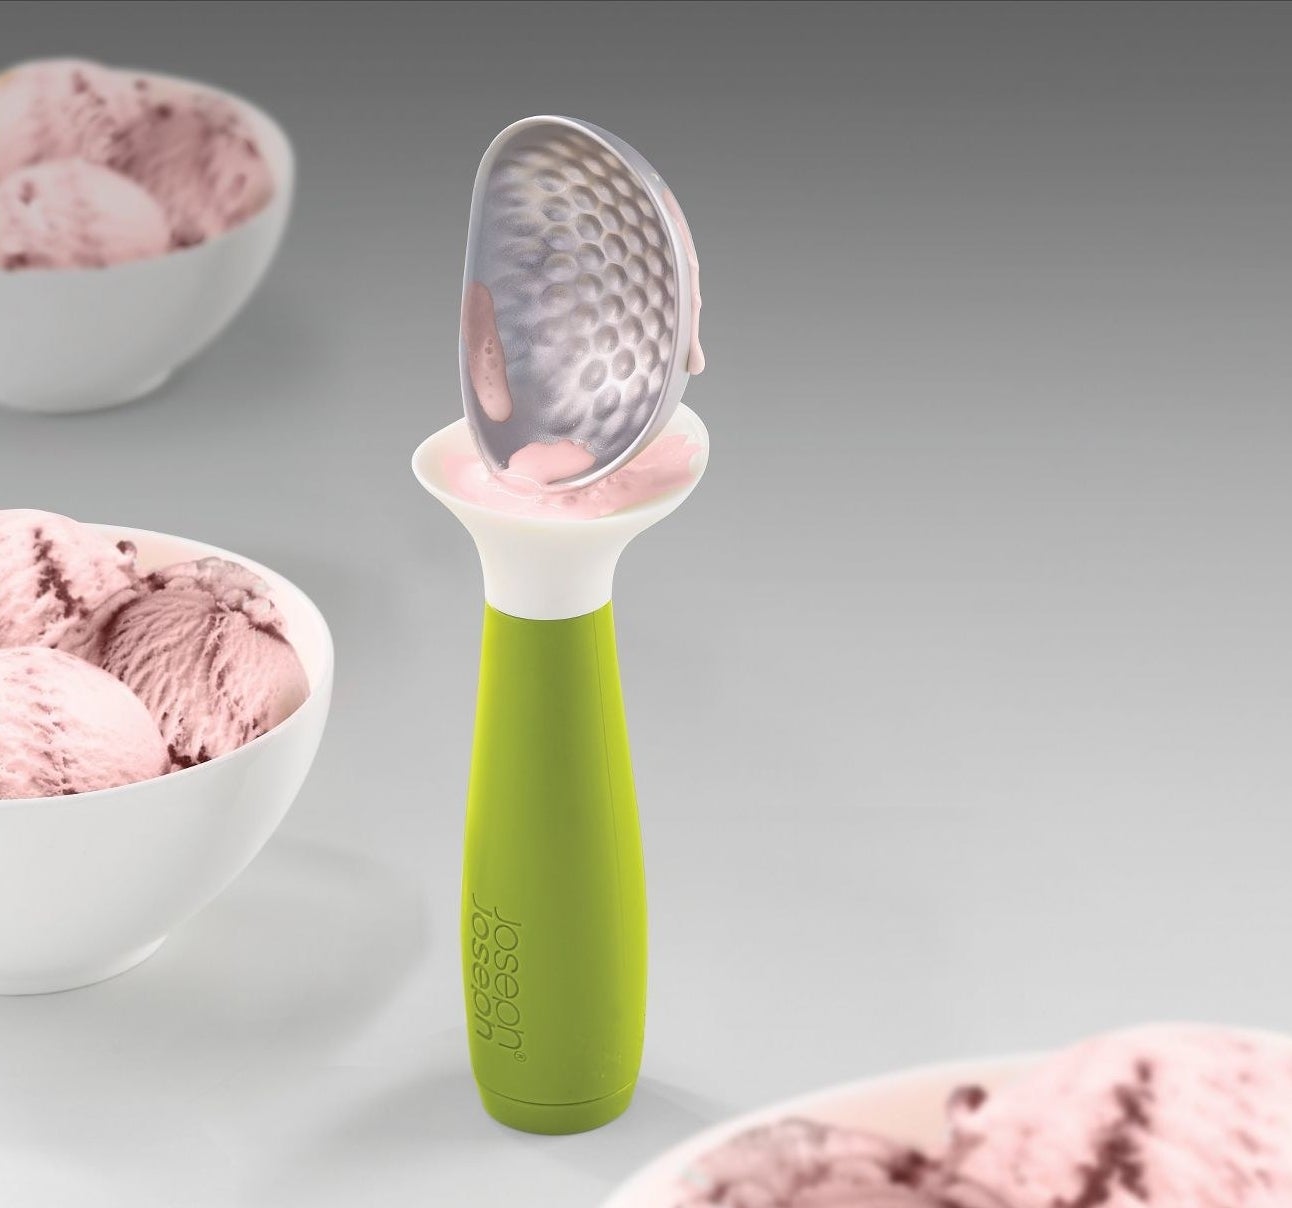 The ice cream scoop, which a wide plastic cuff that flares out below the scoop area, to catch ice cream drips